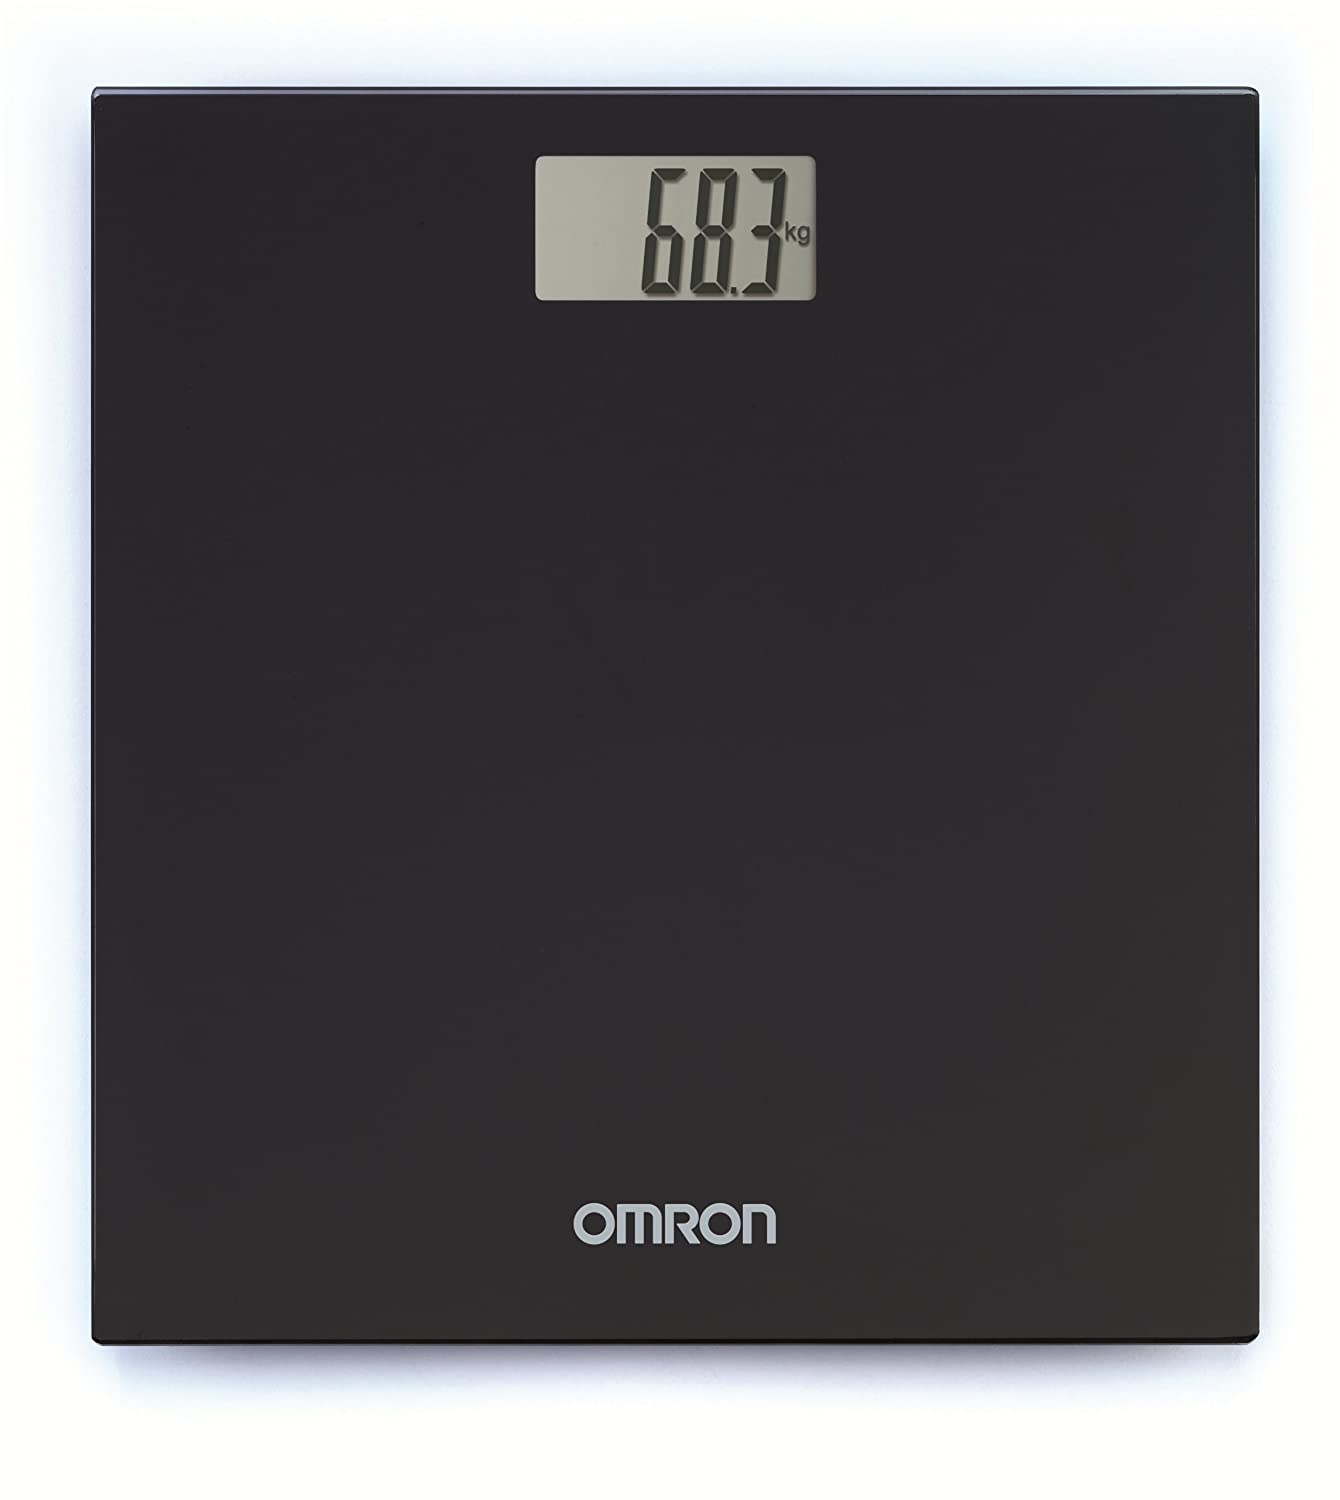 Omron HN 289 Automatic Personal Digital Weight Machine With Large LCD Display and 4 Sensor Technology For Accurate Weight Measurement